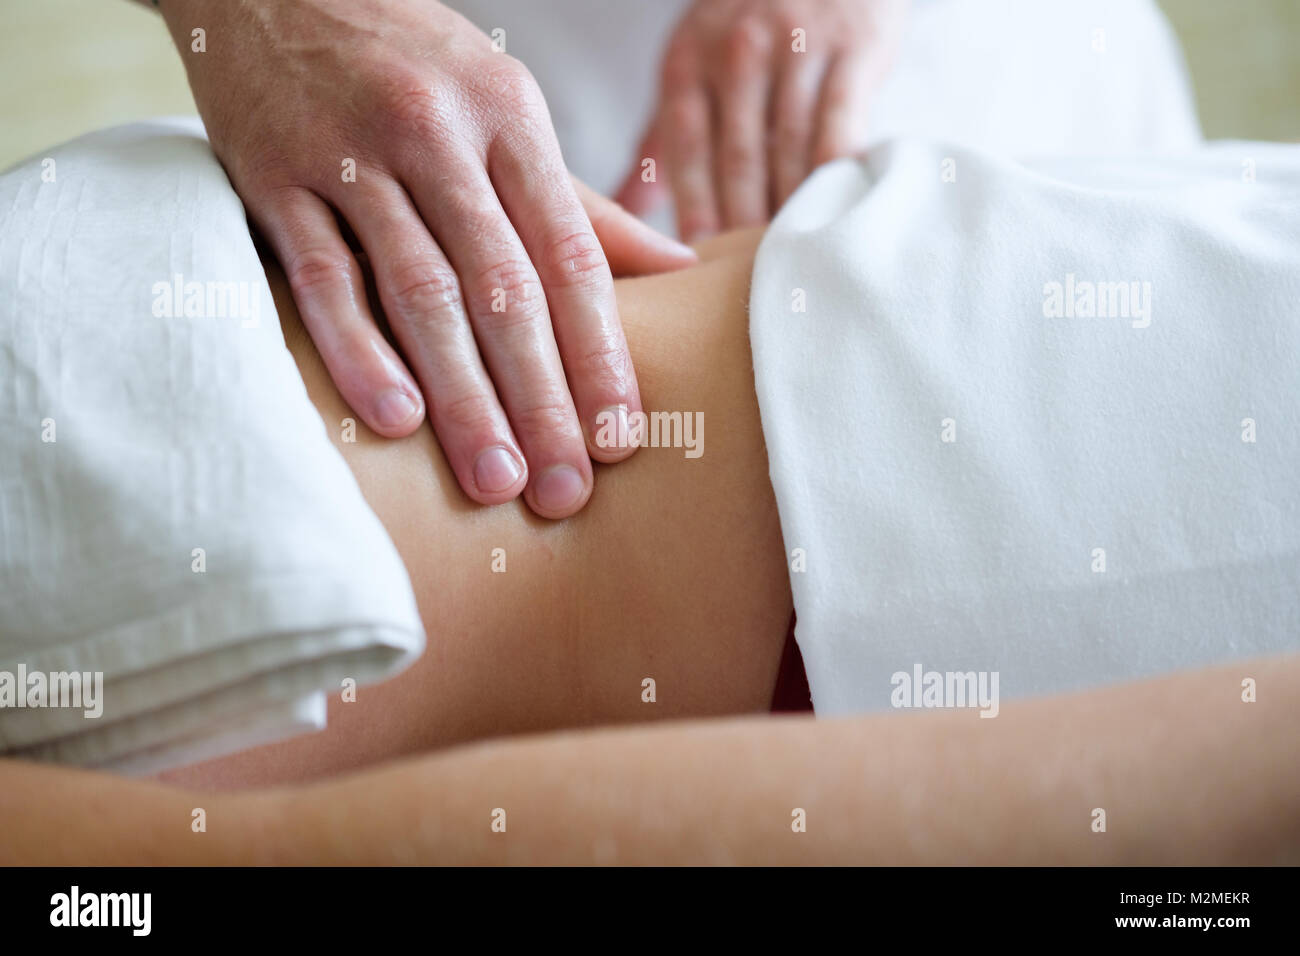 Close up of female belly getting massage by  professional masseur. Body care, skin care, wellness, wellbeing, health, beauty treatment concept. Stock Photo